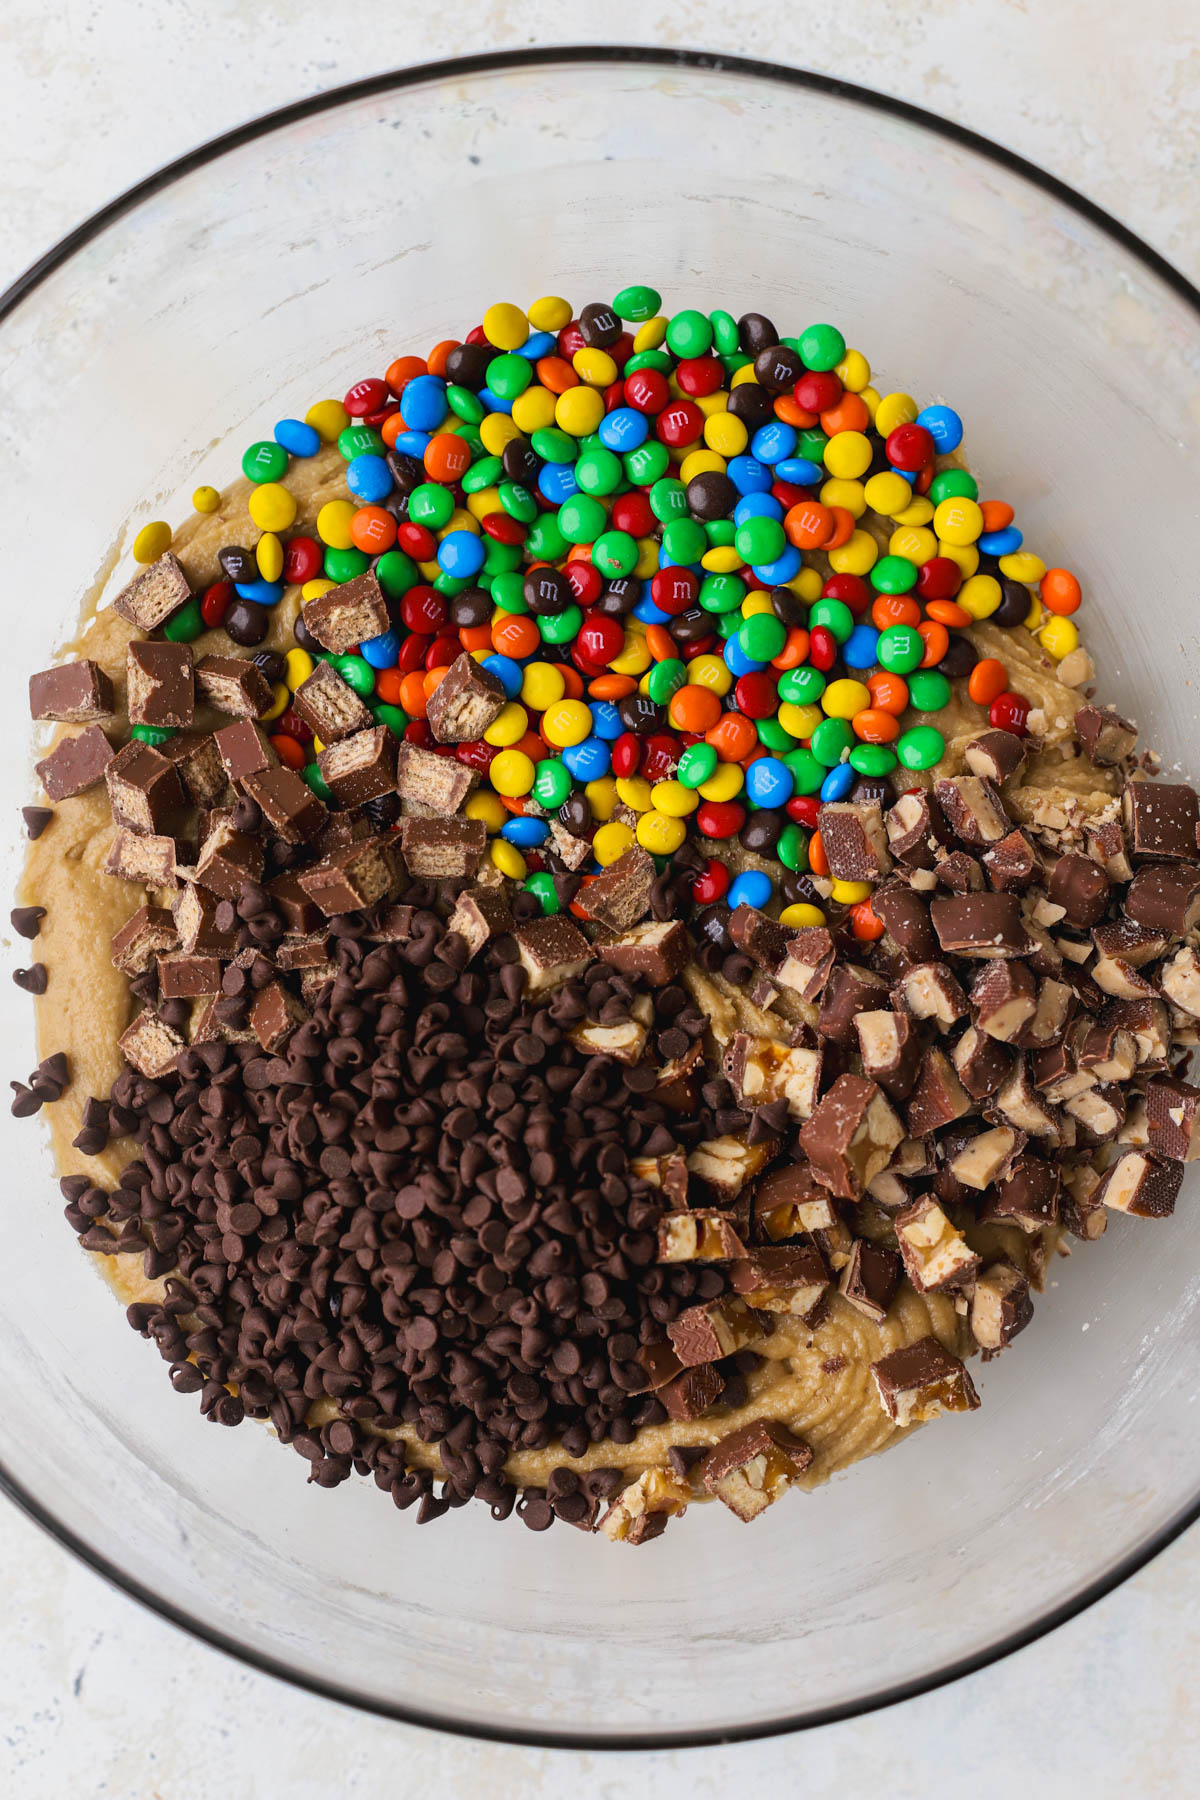 Cookie dough with min chocolate chips, Kit Kat, m&m's, heath bar and snickers.  